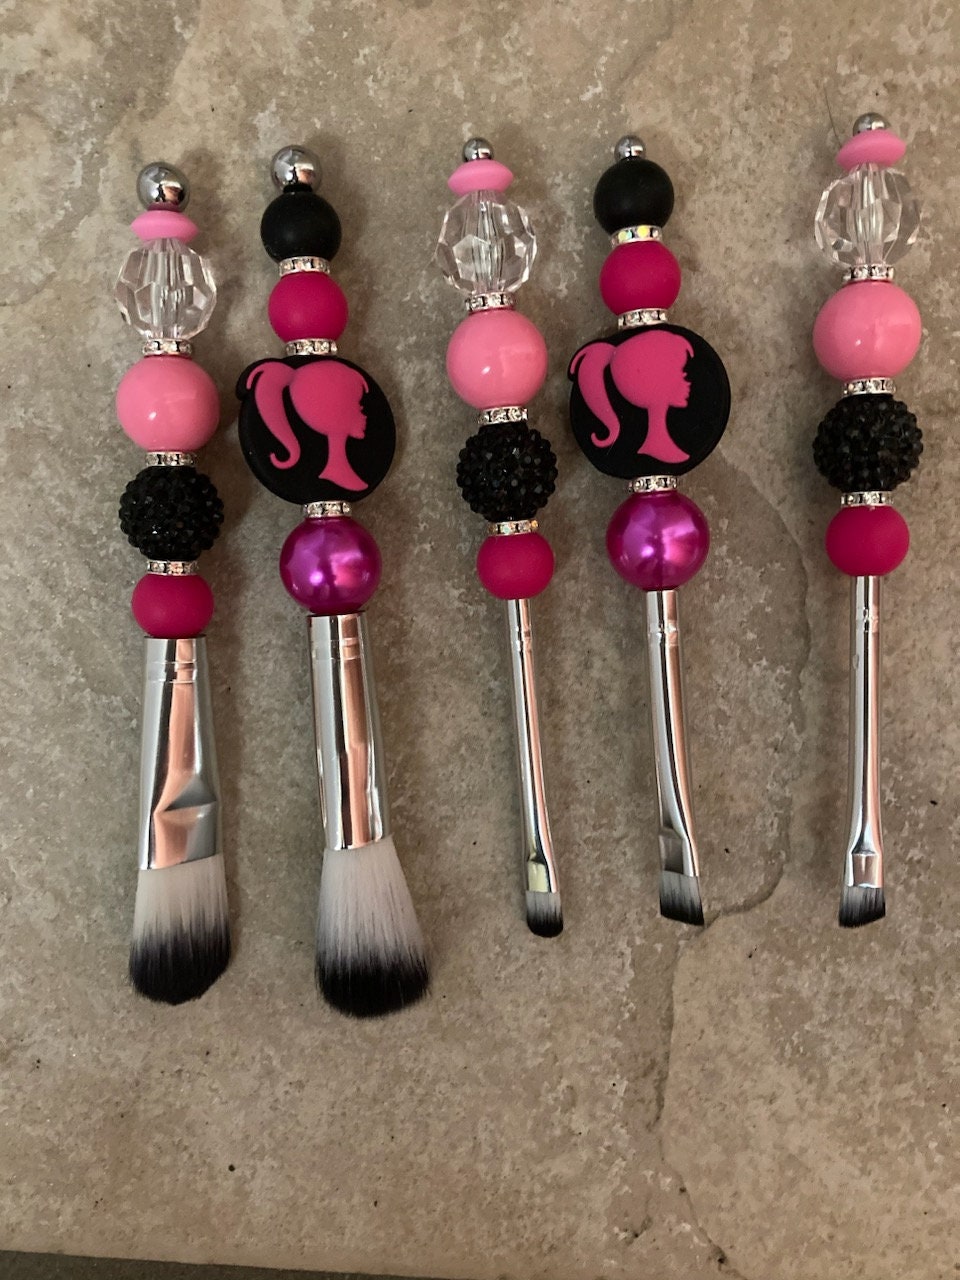 Impressions Vanity All Over Hello Kitty Print 6 Pcs Makeup Brush Set, Super Cute Soft Brushes for Foundation, Face Powder, Makeup Blending, Eye Shadow